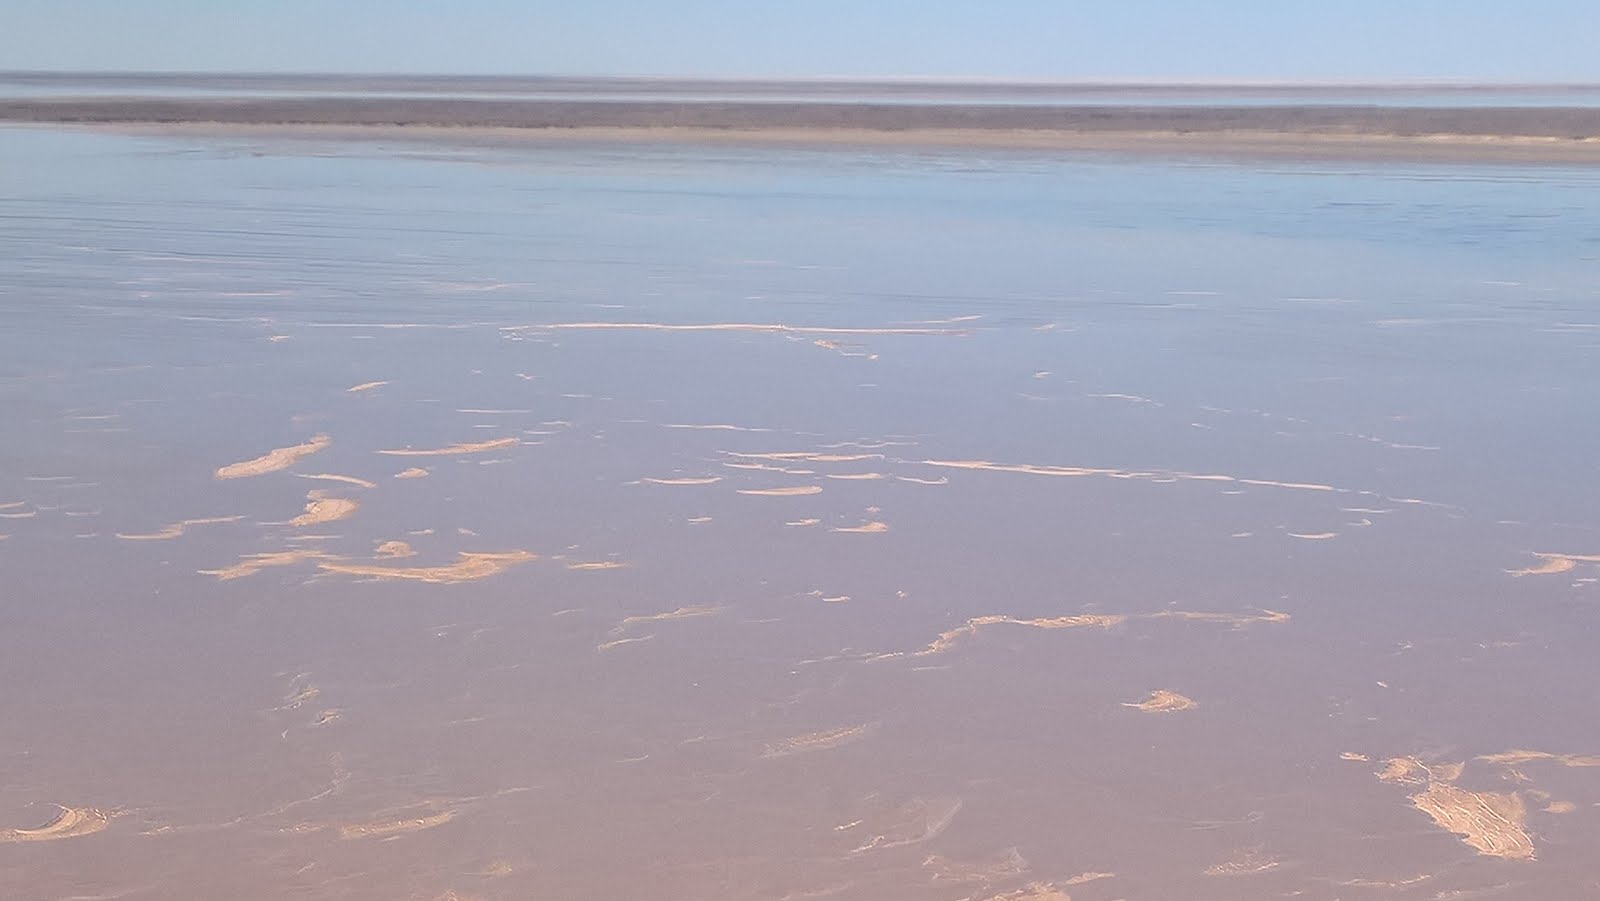 Lake Eyre from the air